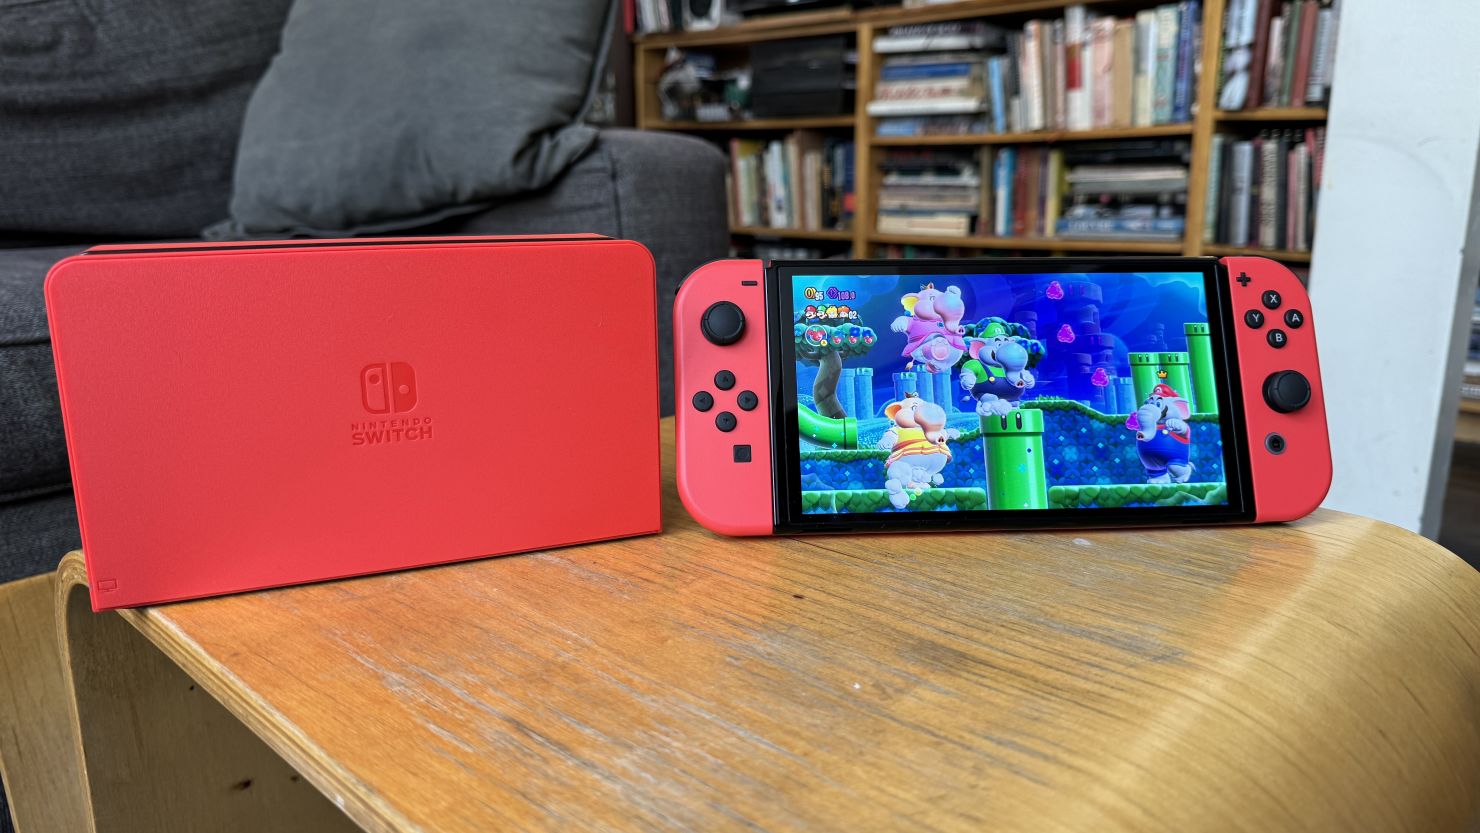 Nintendo launched the Switch in 2017.